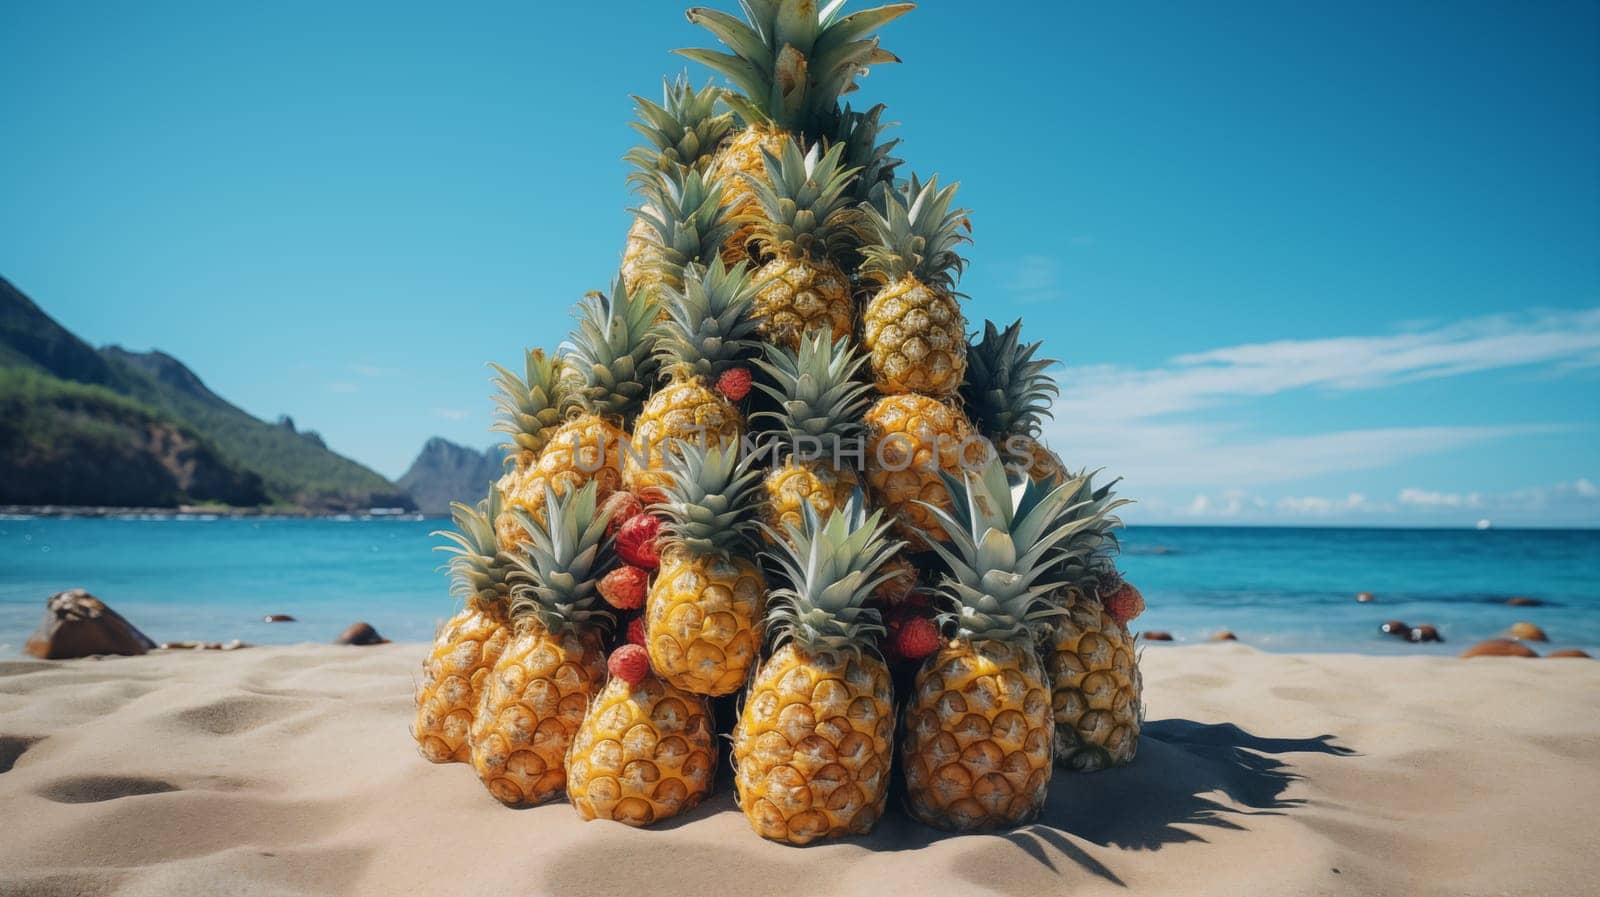 Pyramid of pineapples standing on the sand on the beach.